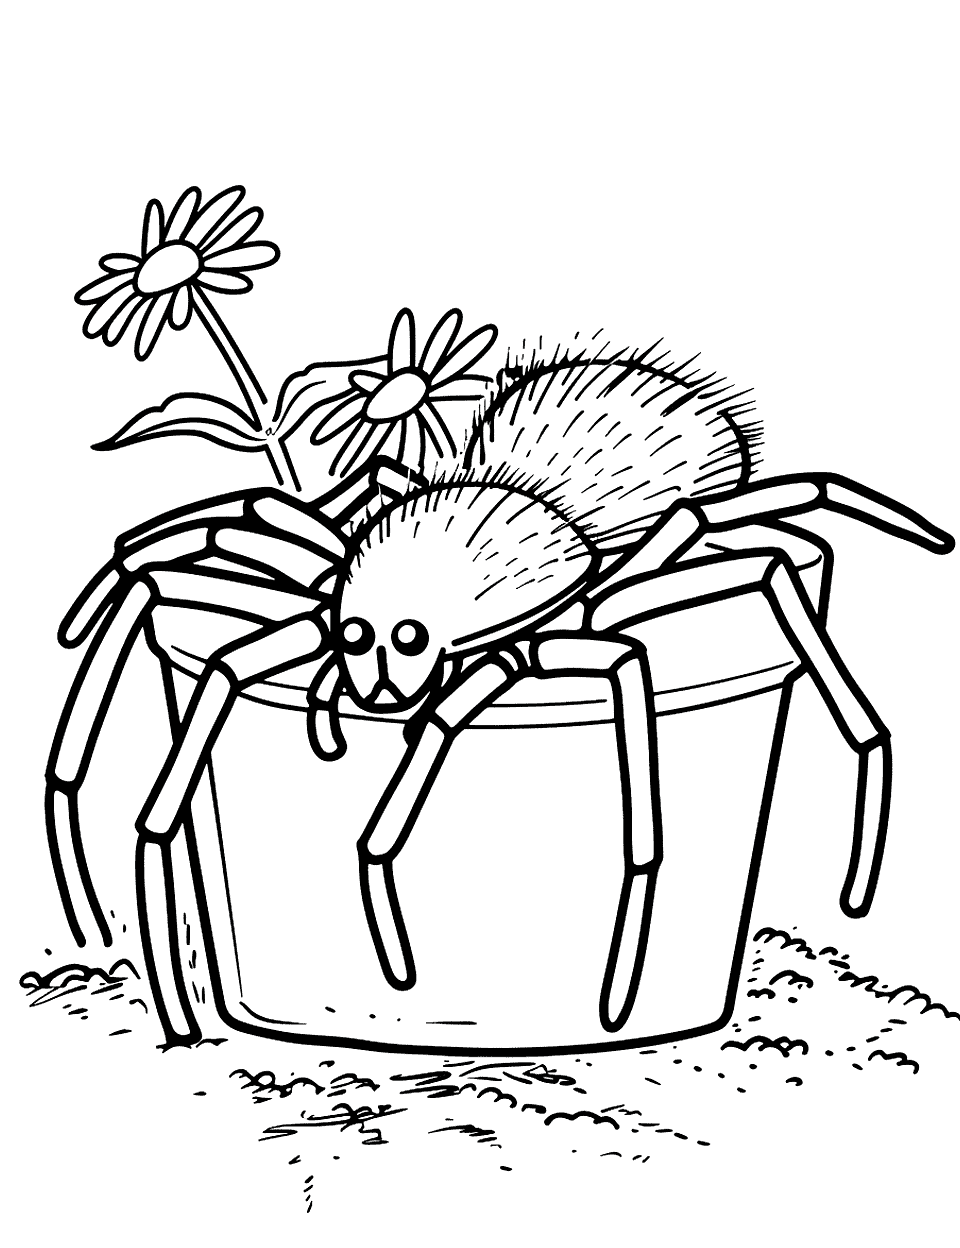 Spider Sitting in a Flower Pot Insect Coloring Page - A spider lounging in a flower pot.